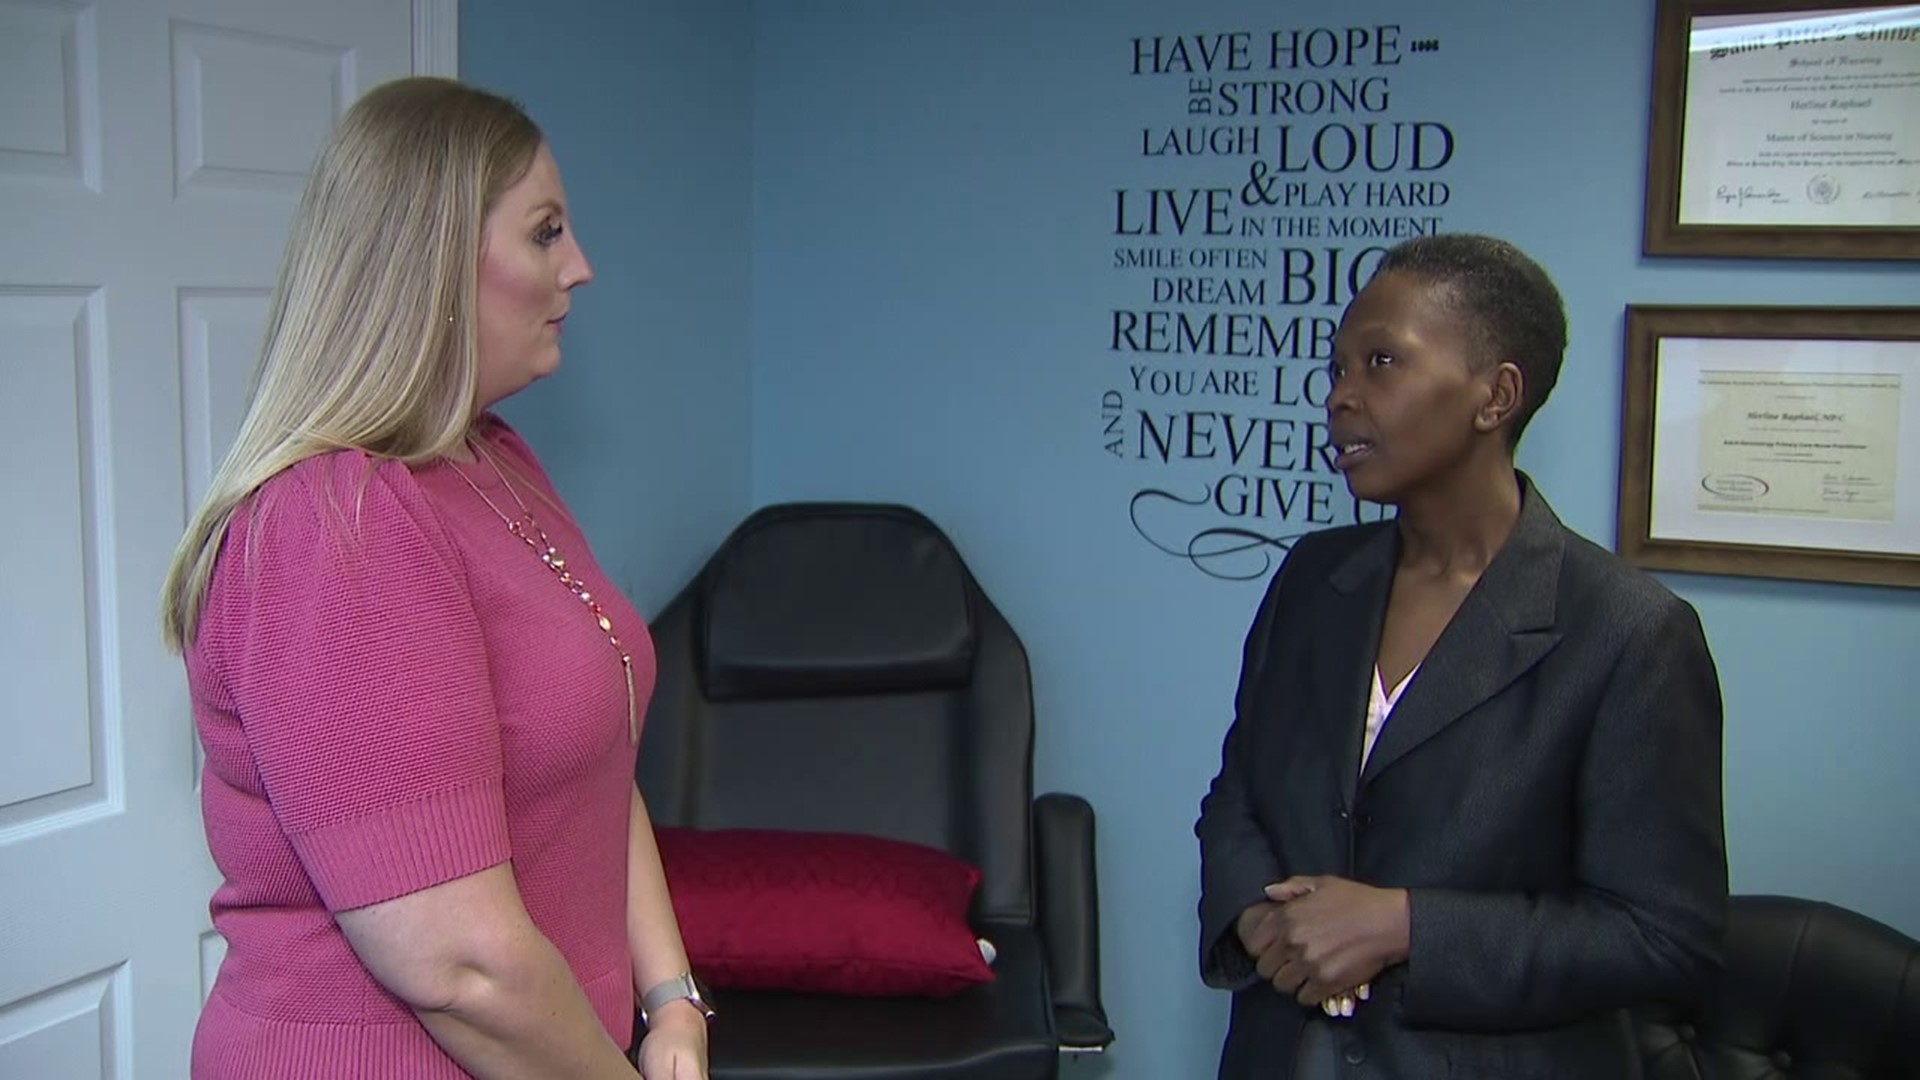 Violence continues to ravage communities in Haiti. Newswatch 16's Emily Kress spoke with the founder of a non-profit that helps provide aid to the people of Haiti.